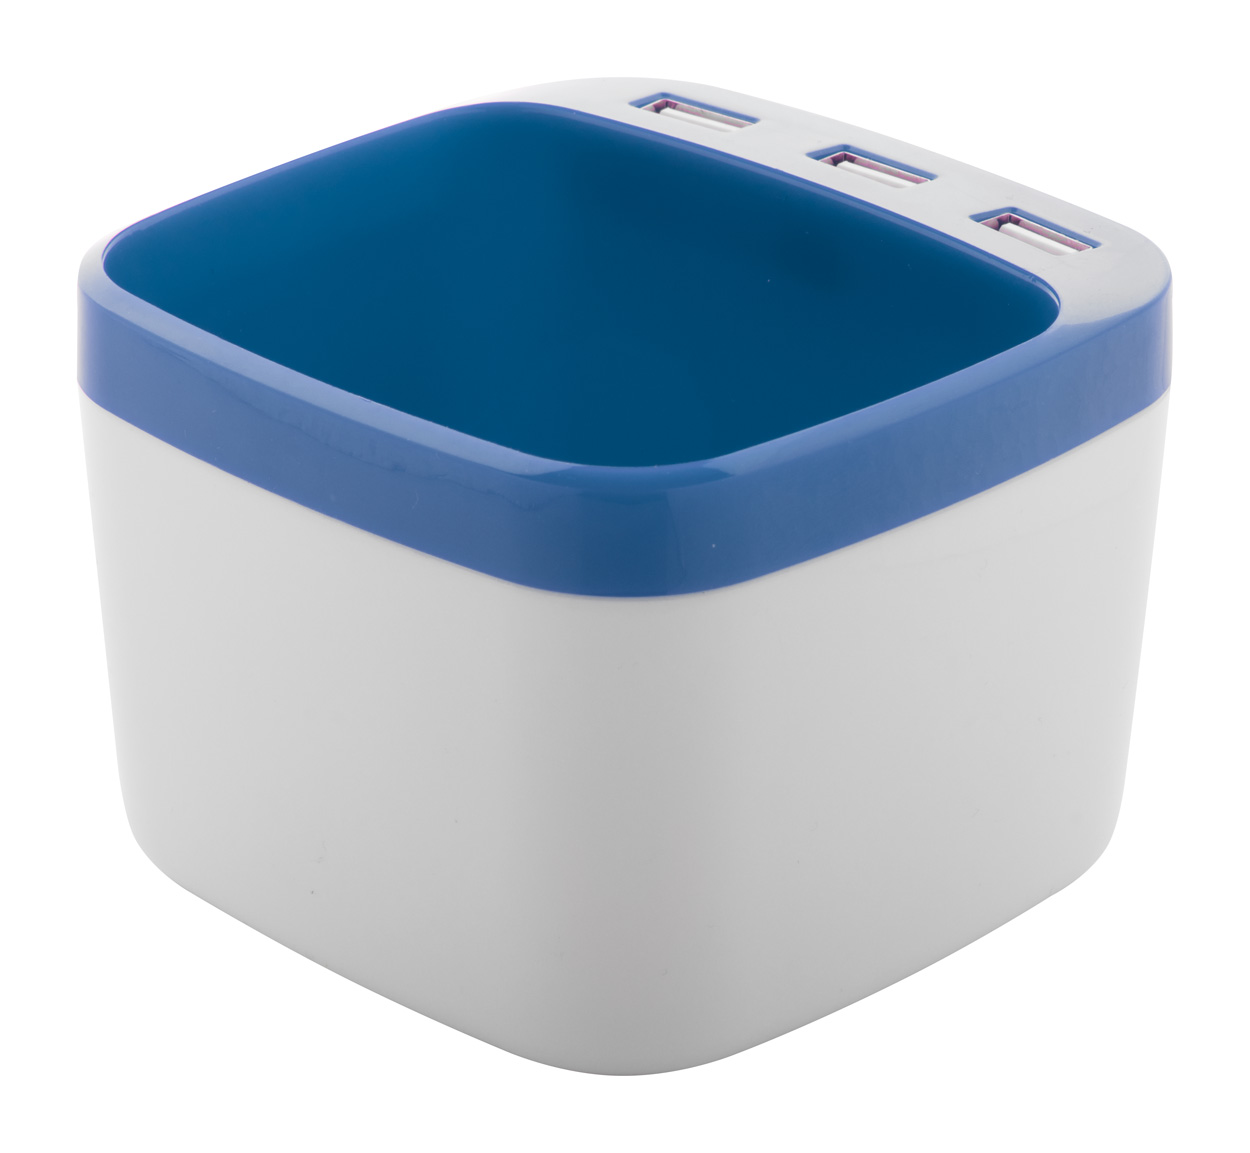 Warger pen holder with USB hub Blue, White